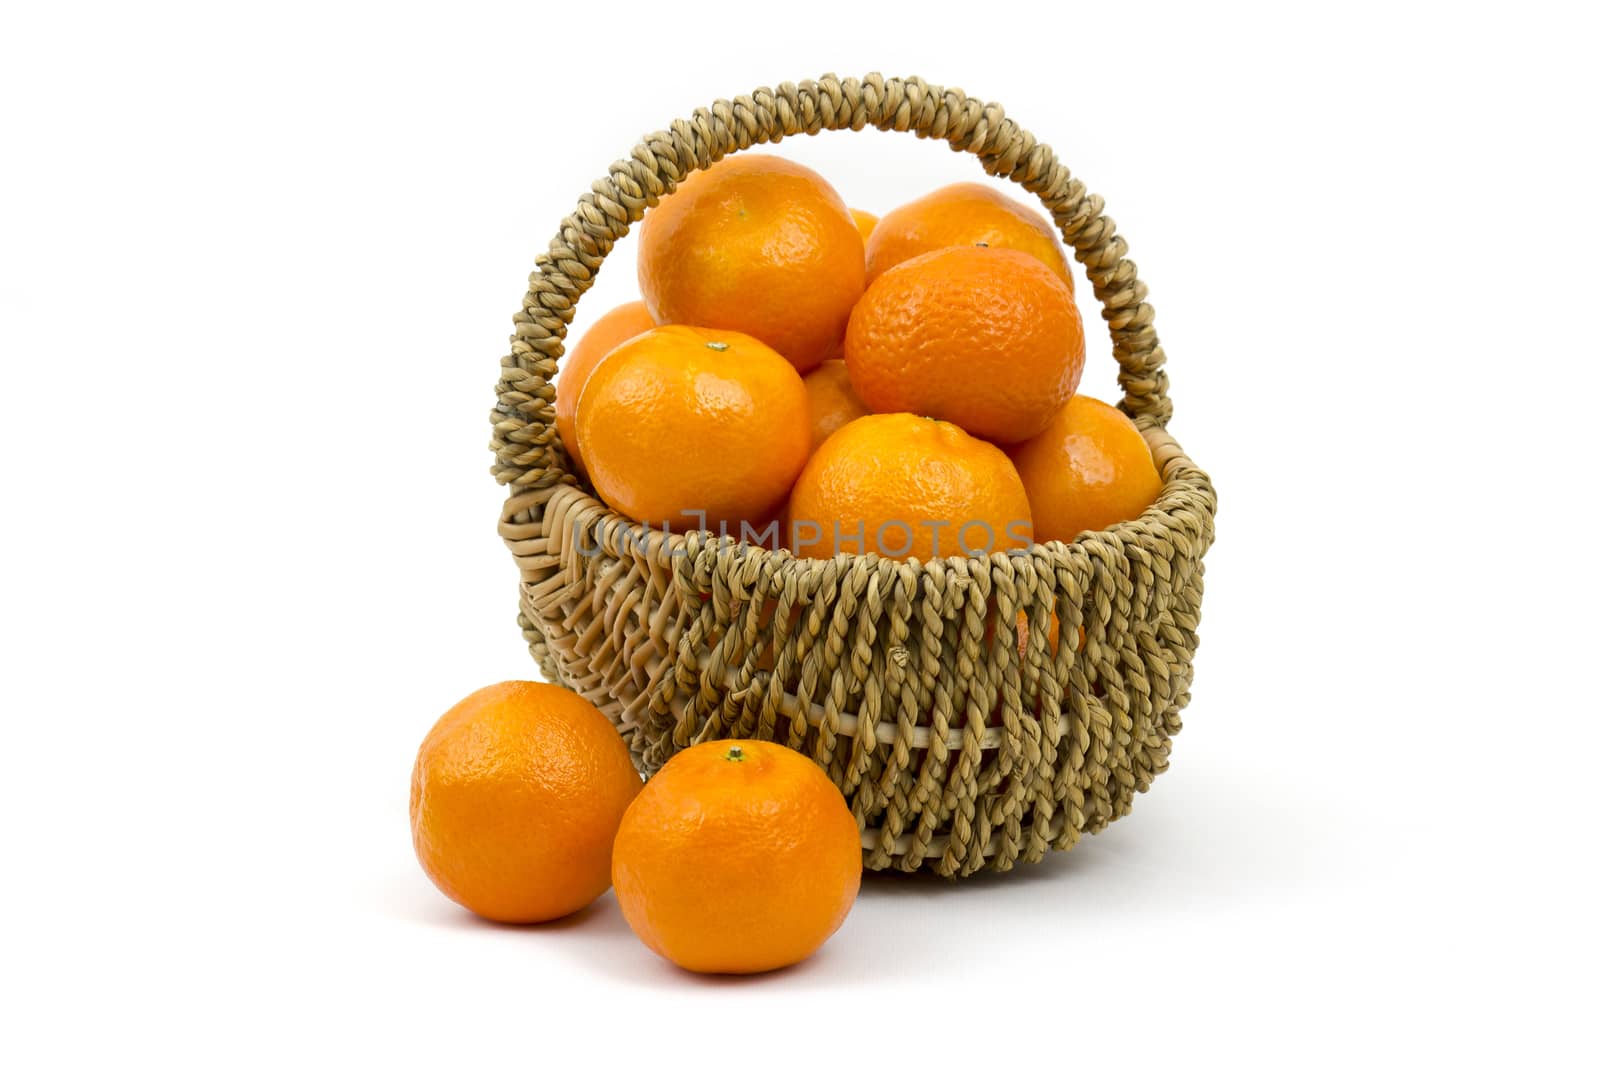 tangerines in a basket on white background  by miradrozdowski